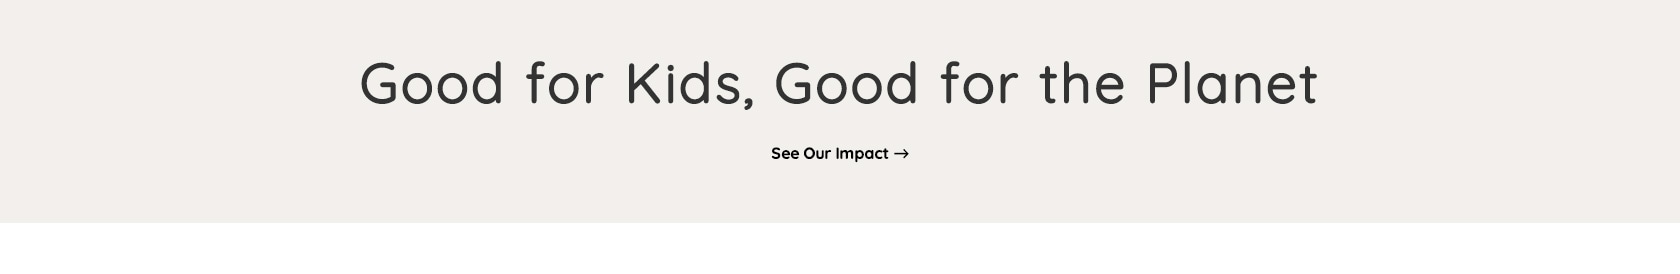 Good for kids, good for the planet -> See our impact